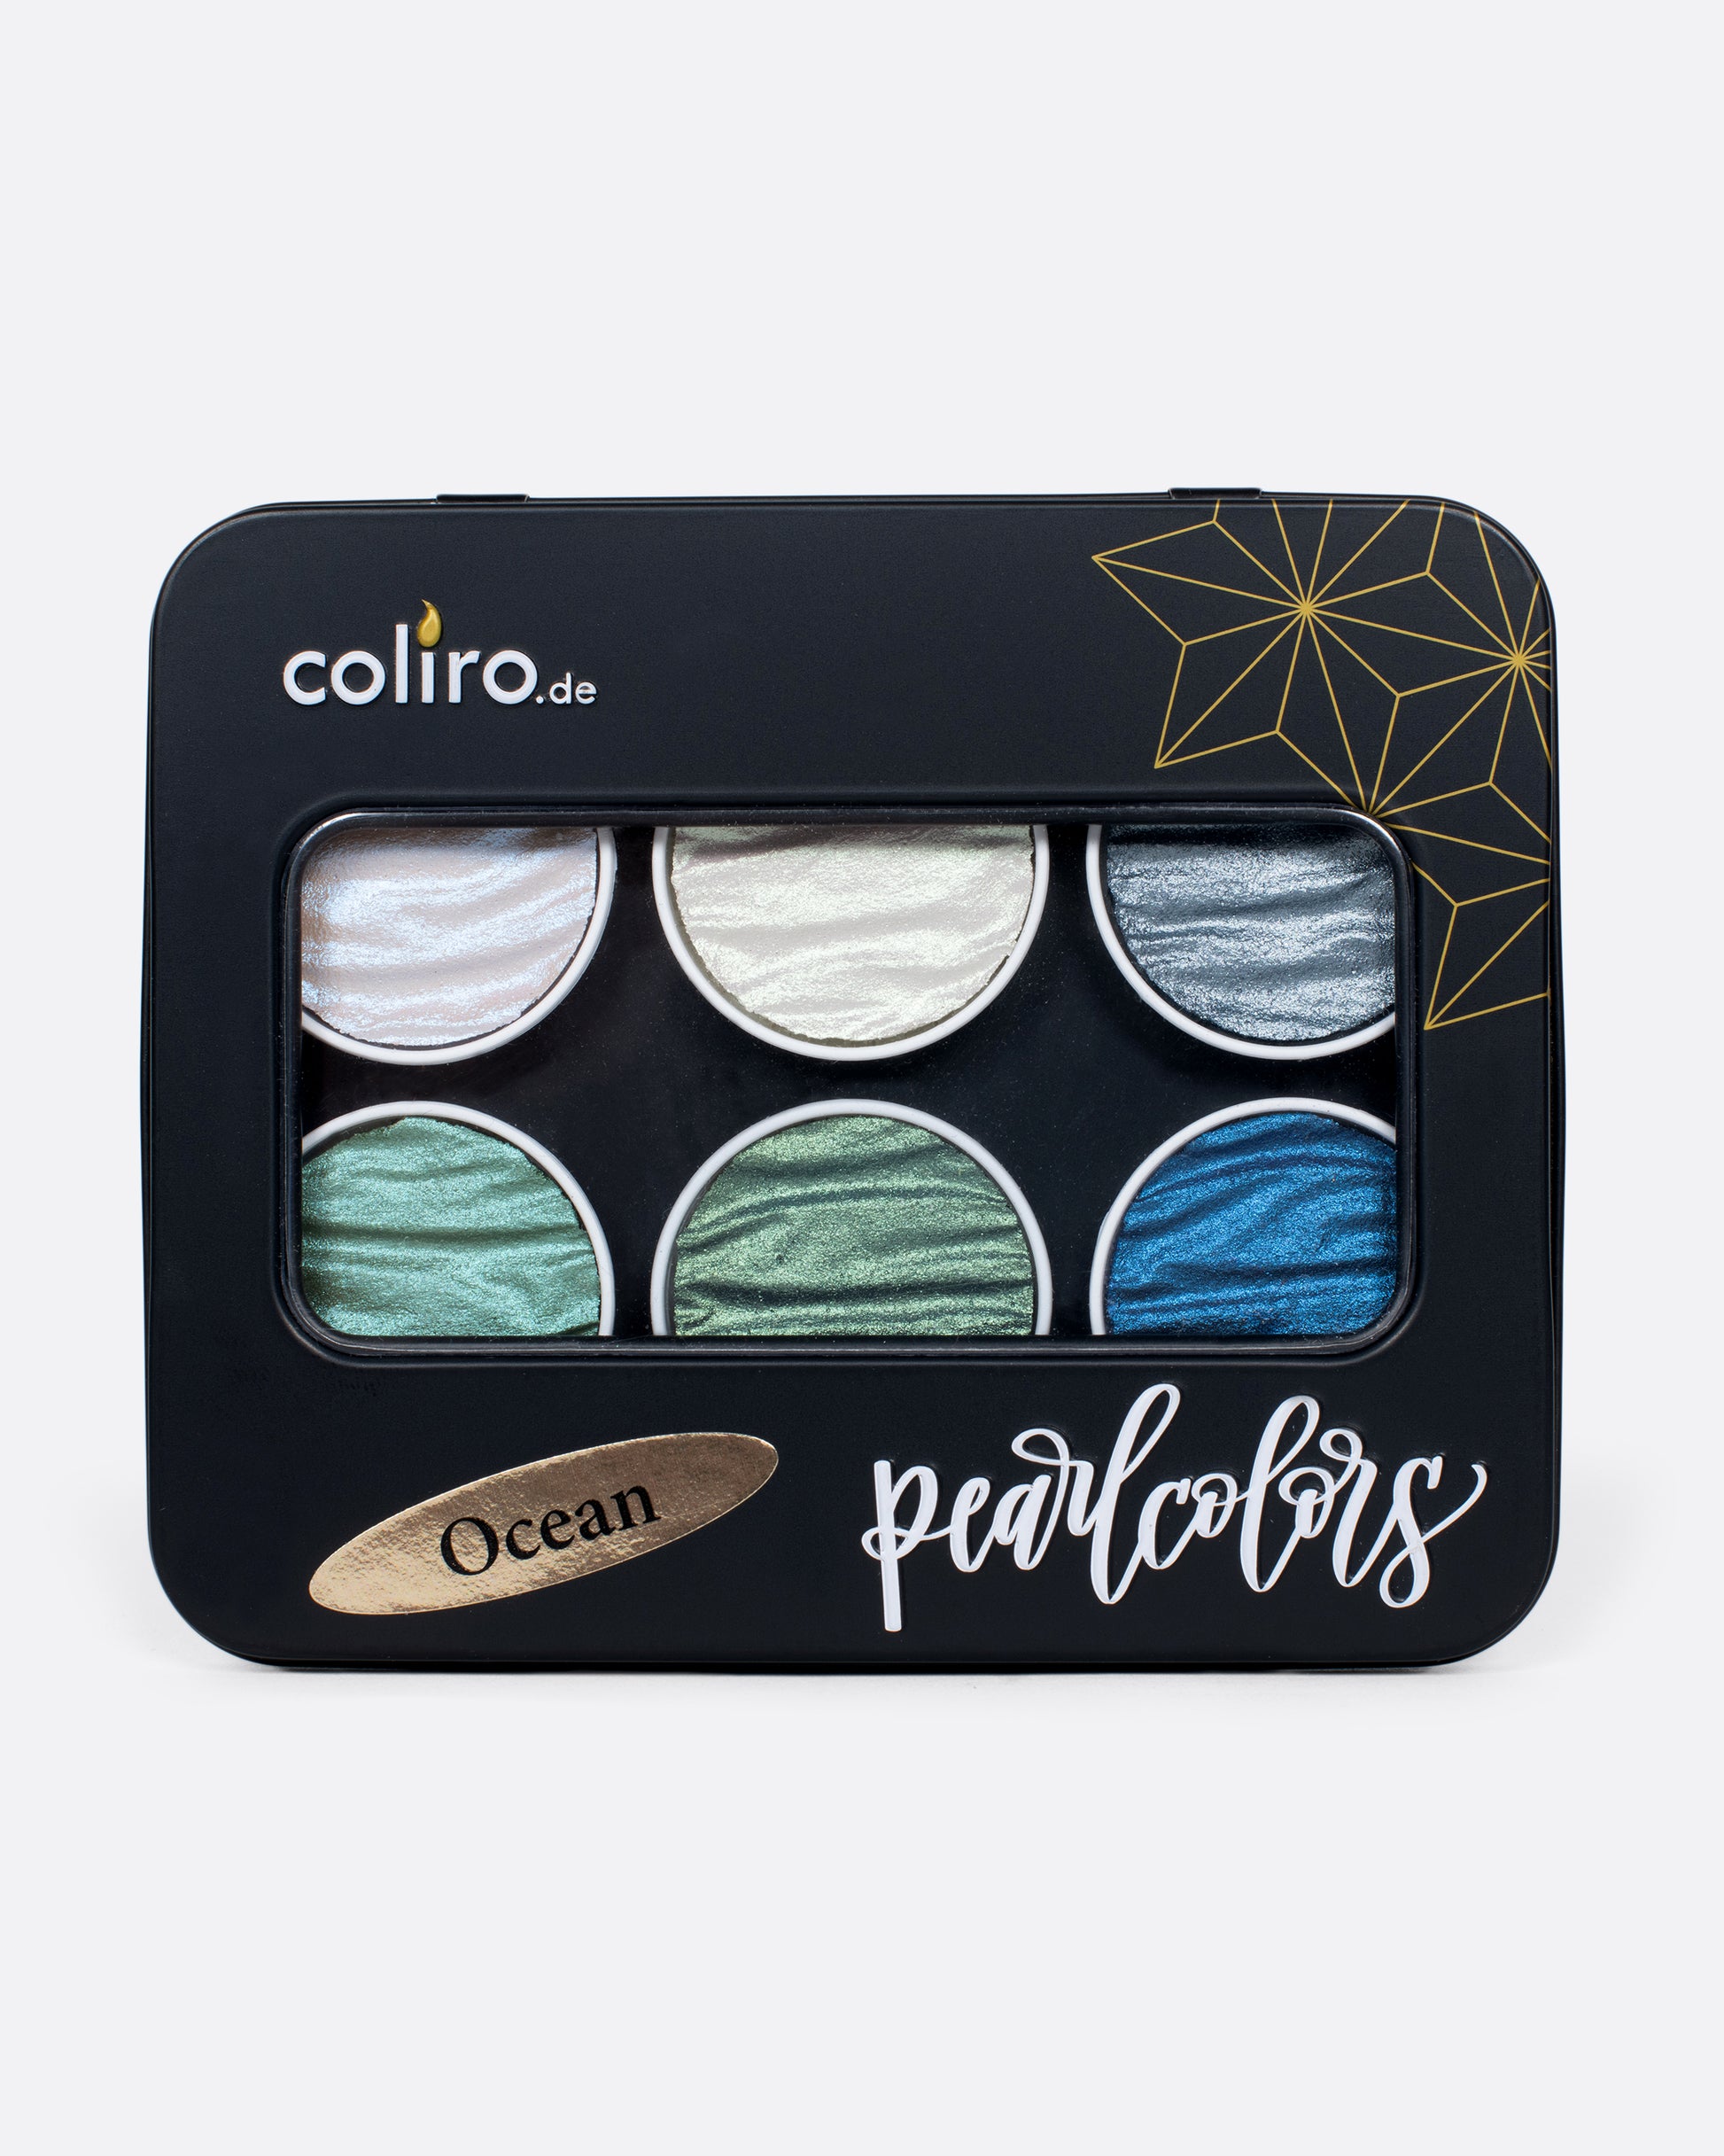 Made in Germany, this metallic watercolor set features colors themed like the ocean, use in addition to more opaque colors to create shimmering paintings.